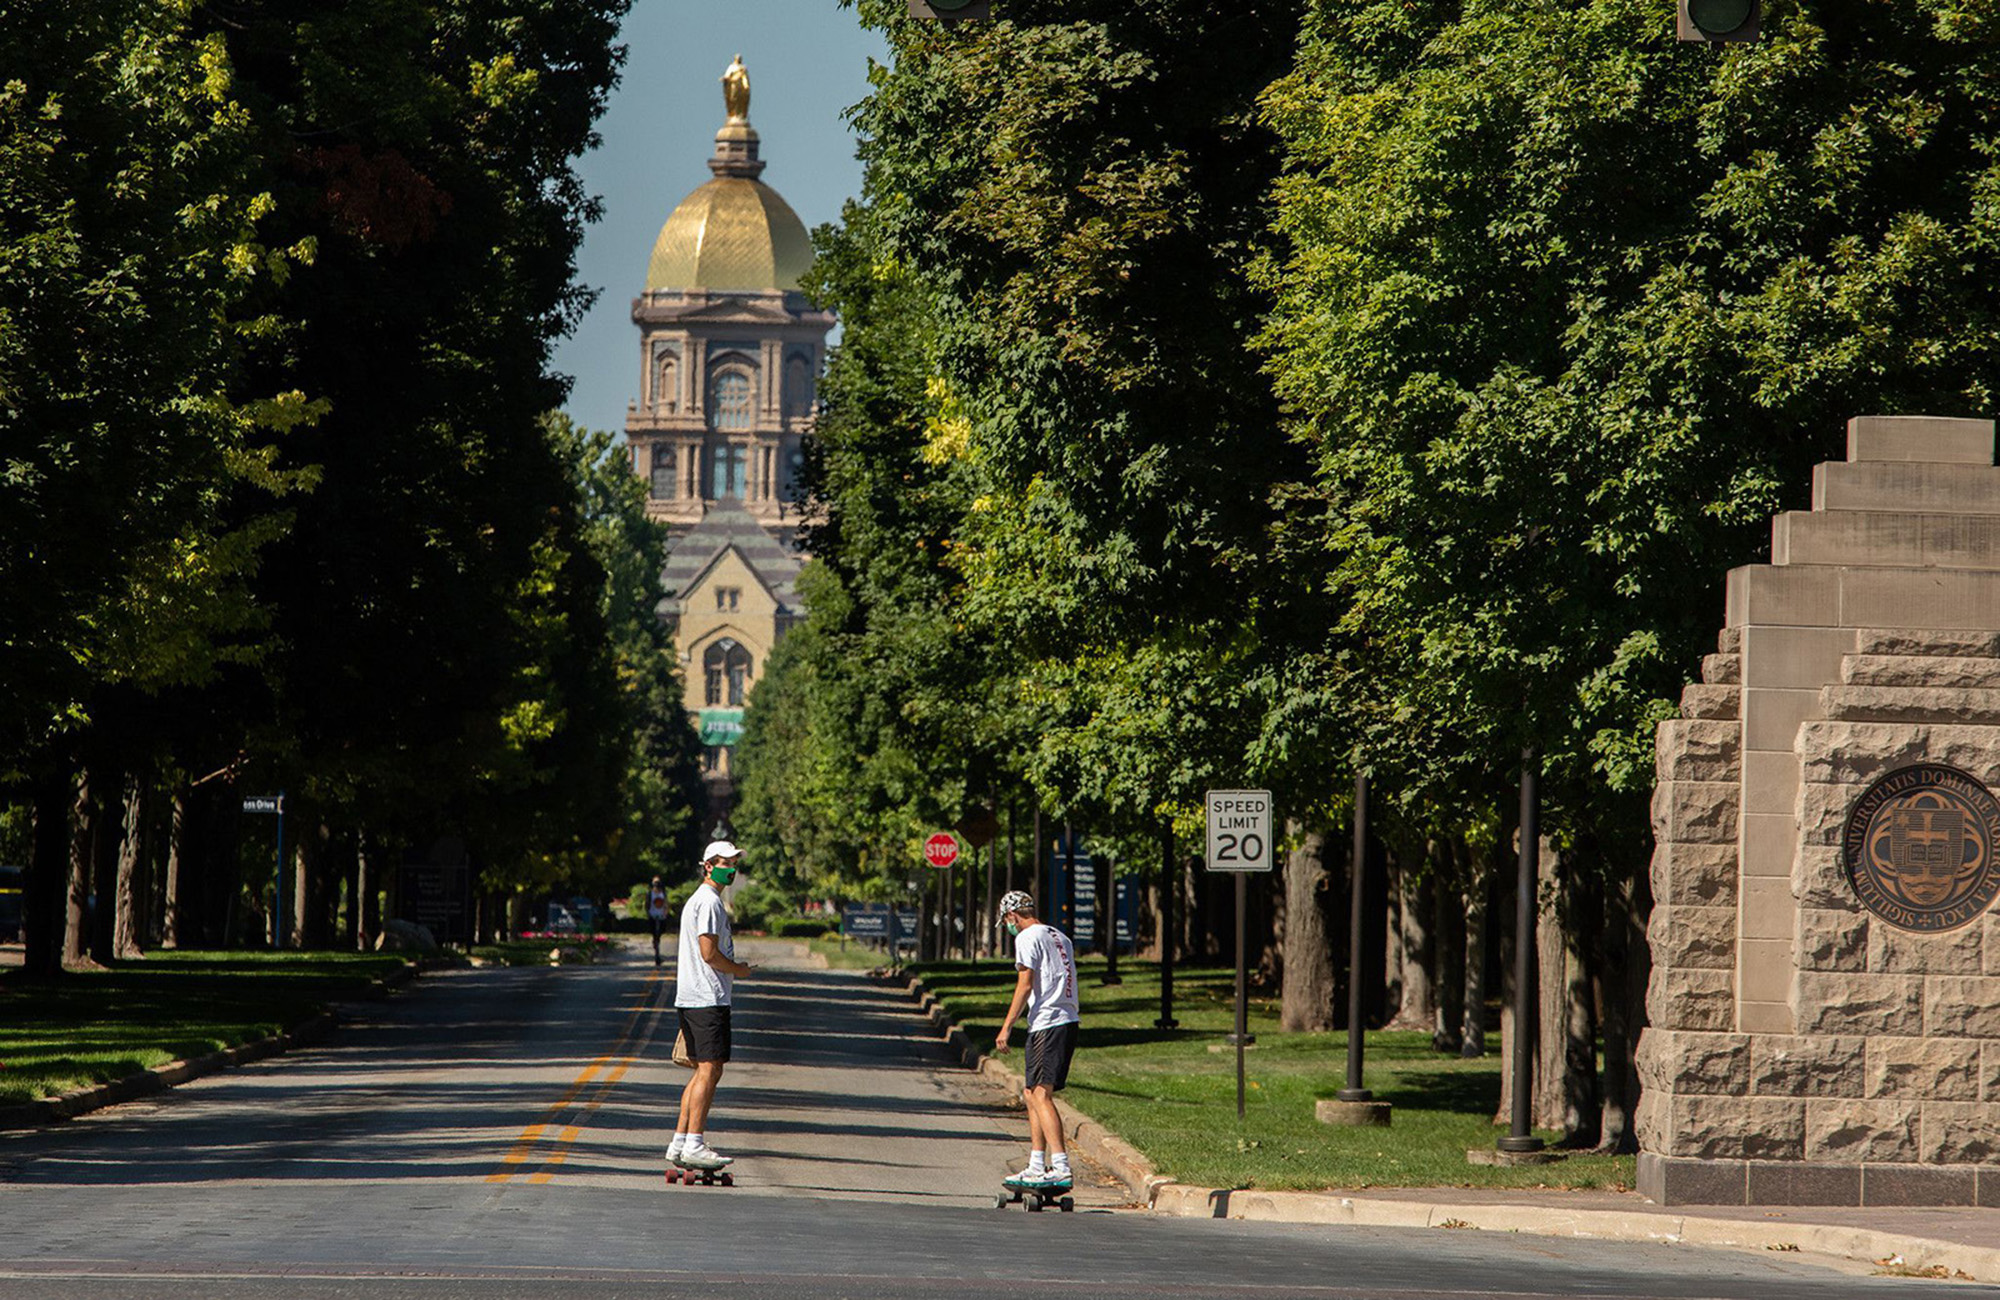 PHOTO: Students on the campus at the University of Notre Dame in South Bend, Ind. on Aug. 23, 2020.